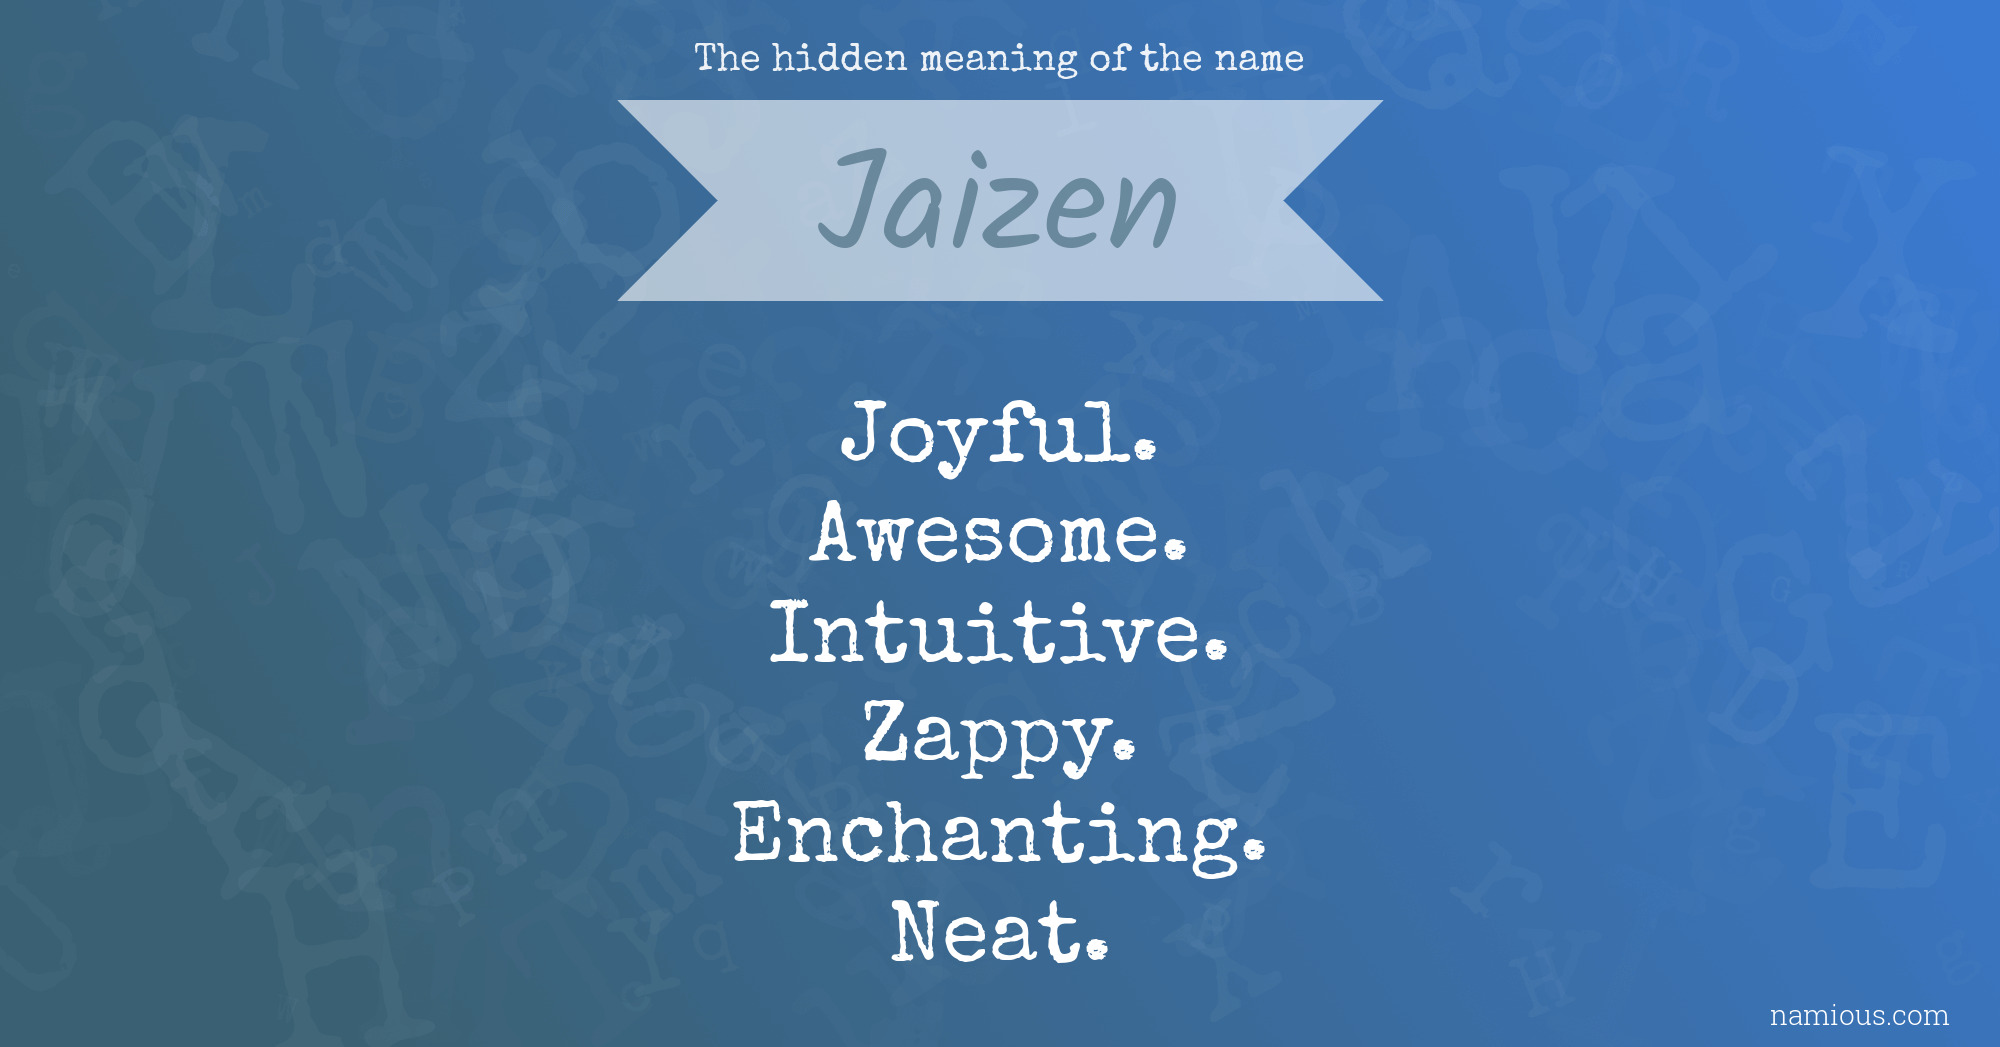 The hidden meaning of the name Jaizen